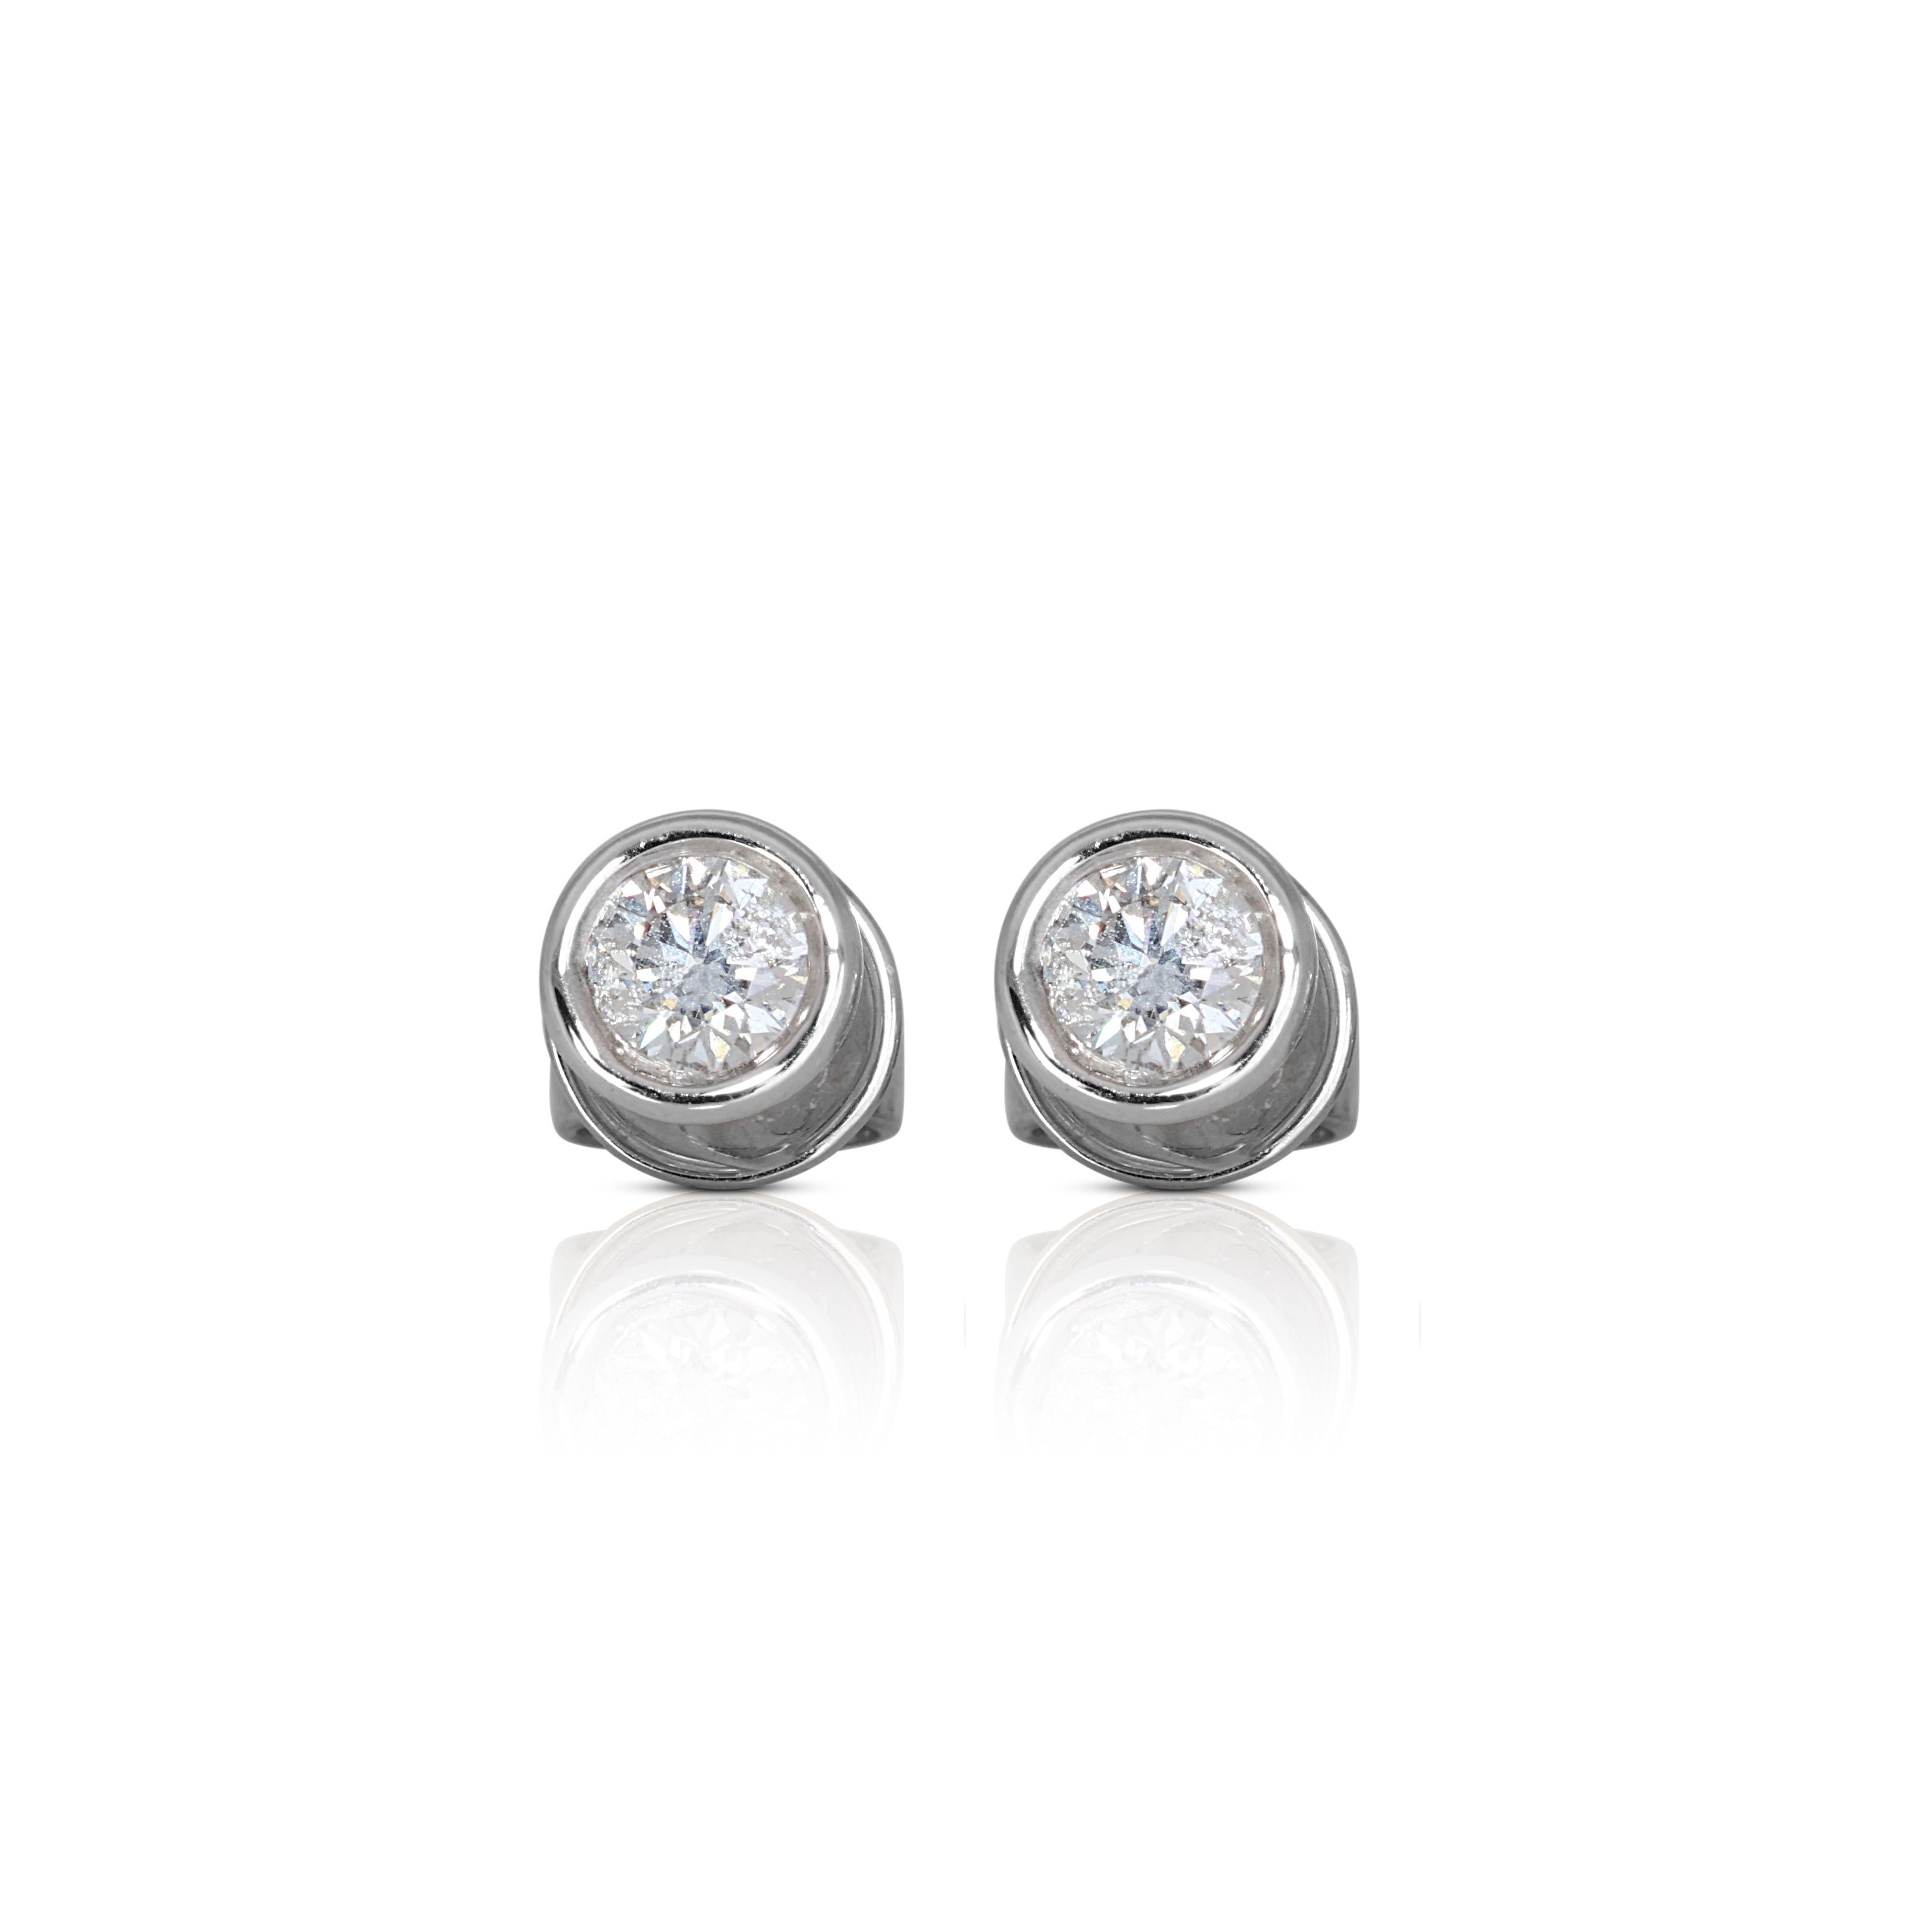 Elevate your jewelry collection to new heights with our exquisite 14K White Gold Diamond Earrings. Crafted with precision and designed to radiate timeless sophistication, these earrings are the epitome of elegance.
Product Details:

Metal: 14K White